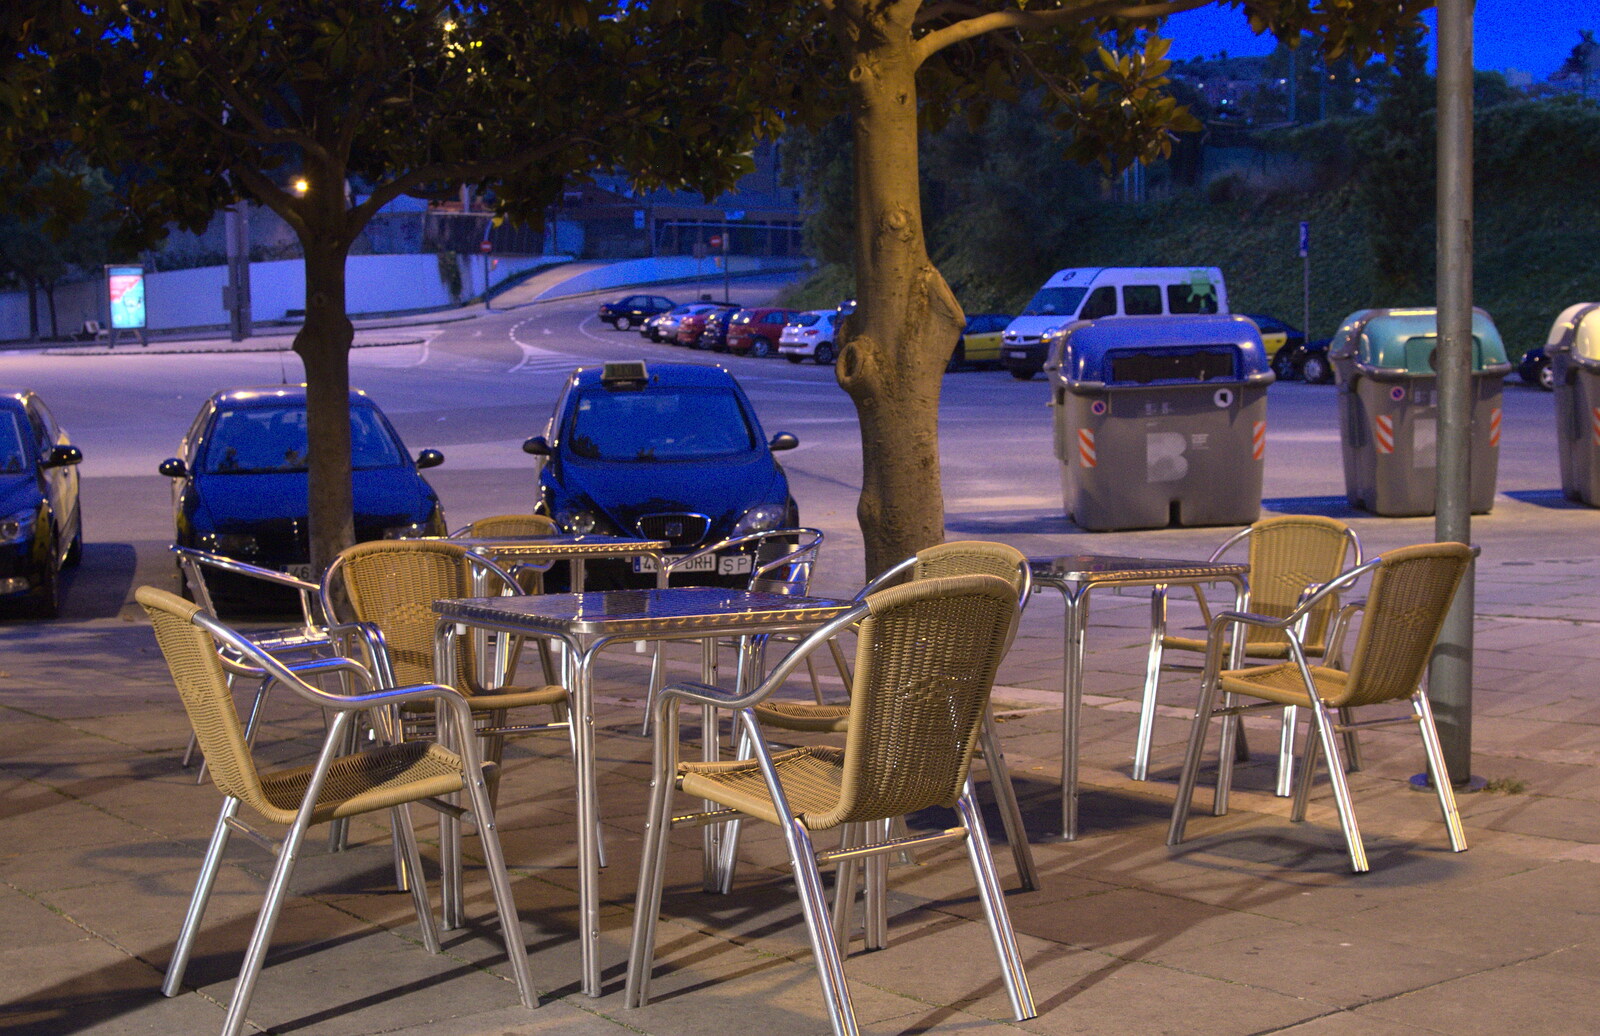 Café tables at night from The Open Education Challenge, Barcelona, Catalonia - 13th July 2014